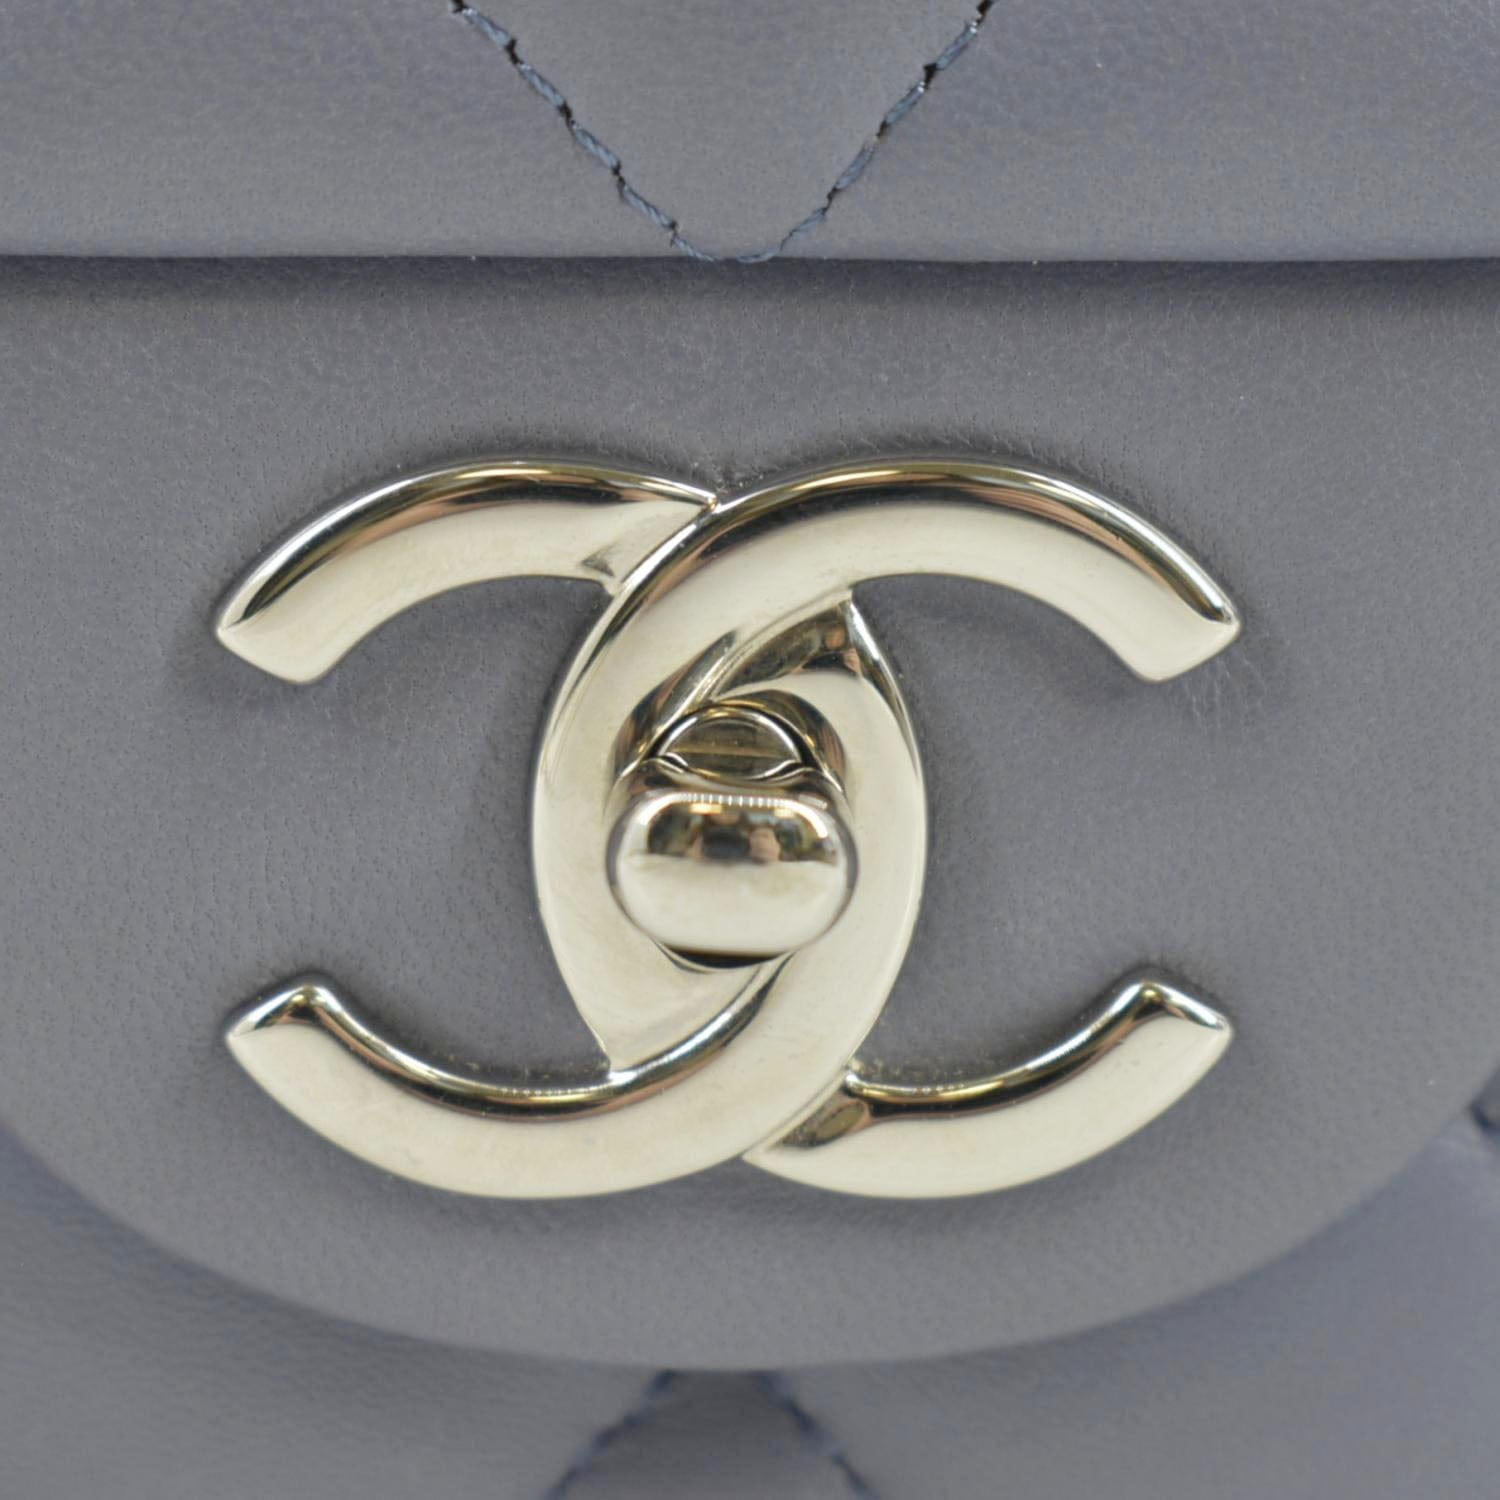 Chanel Classic Maxi Double Flap Quilted Lambskin Leather Shoulder Bag Light Purple